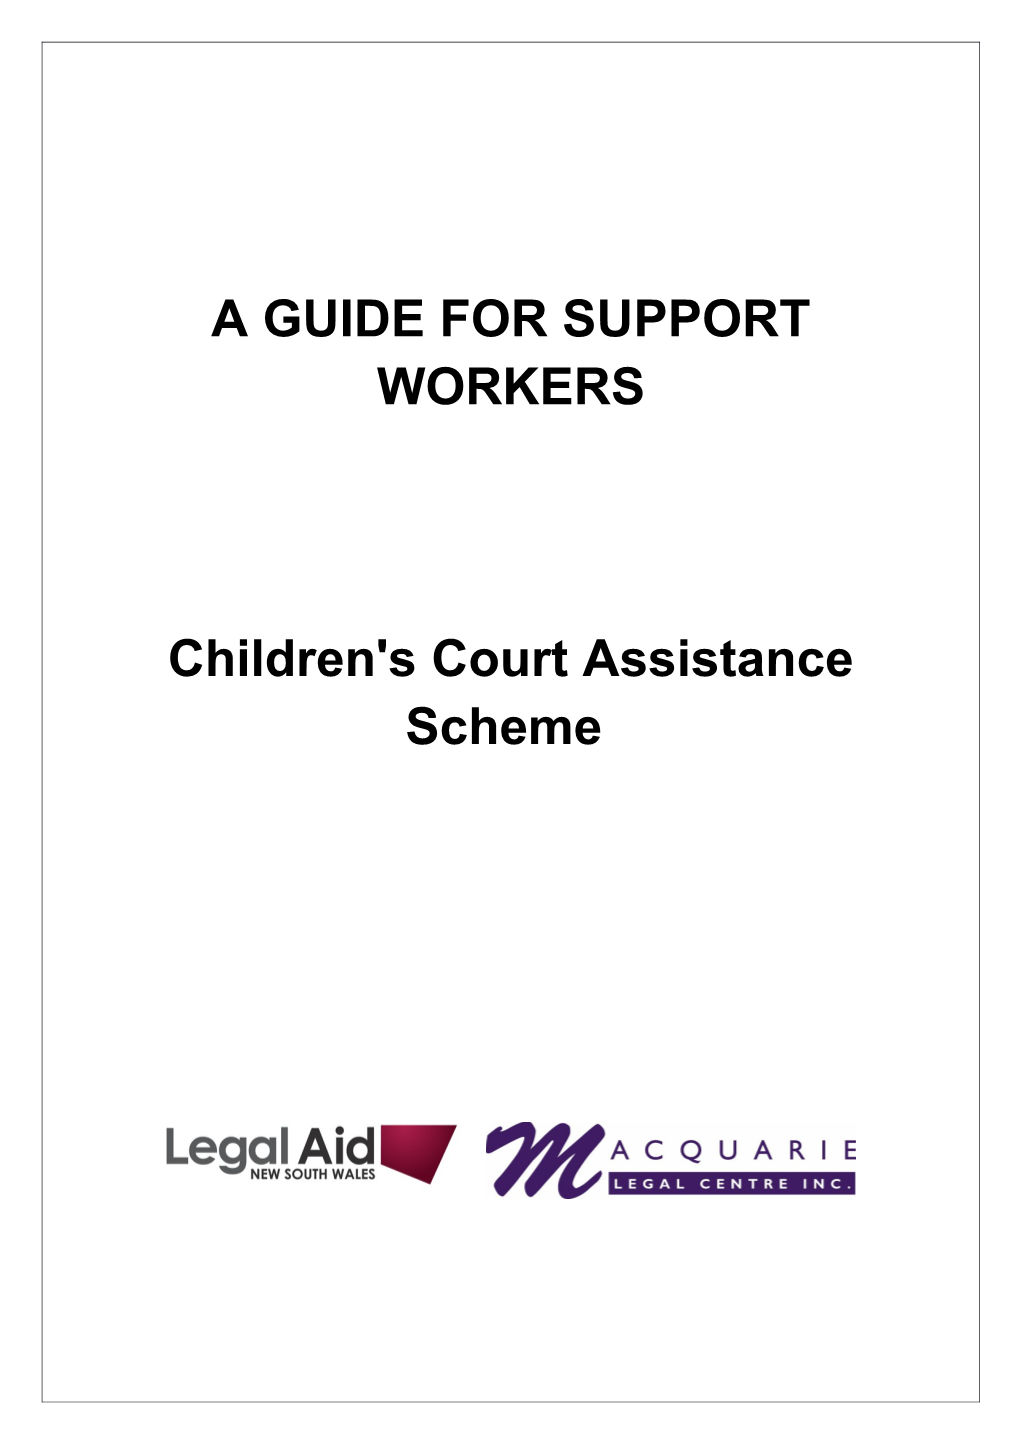 A Guide for Support Workers